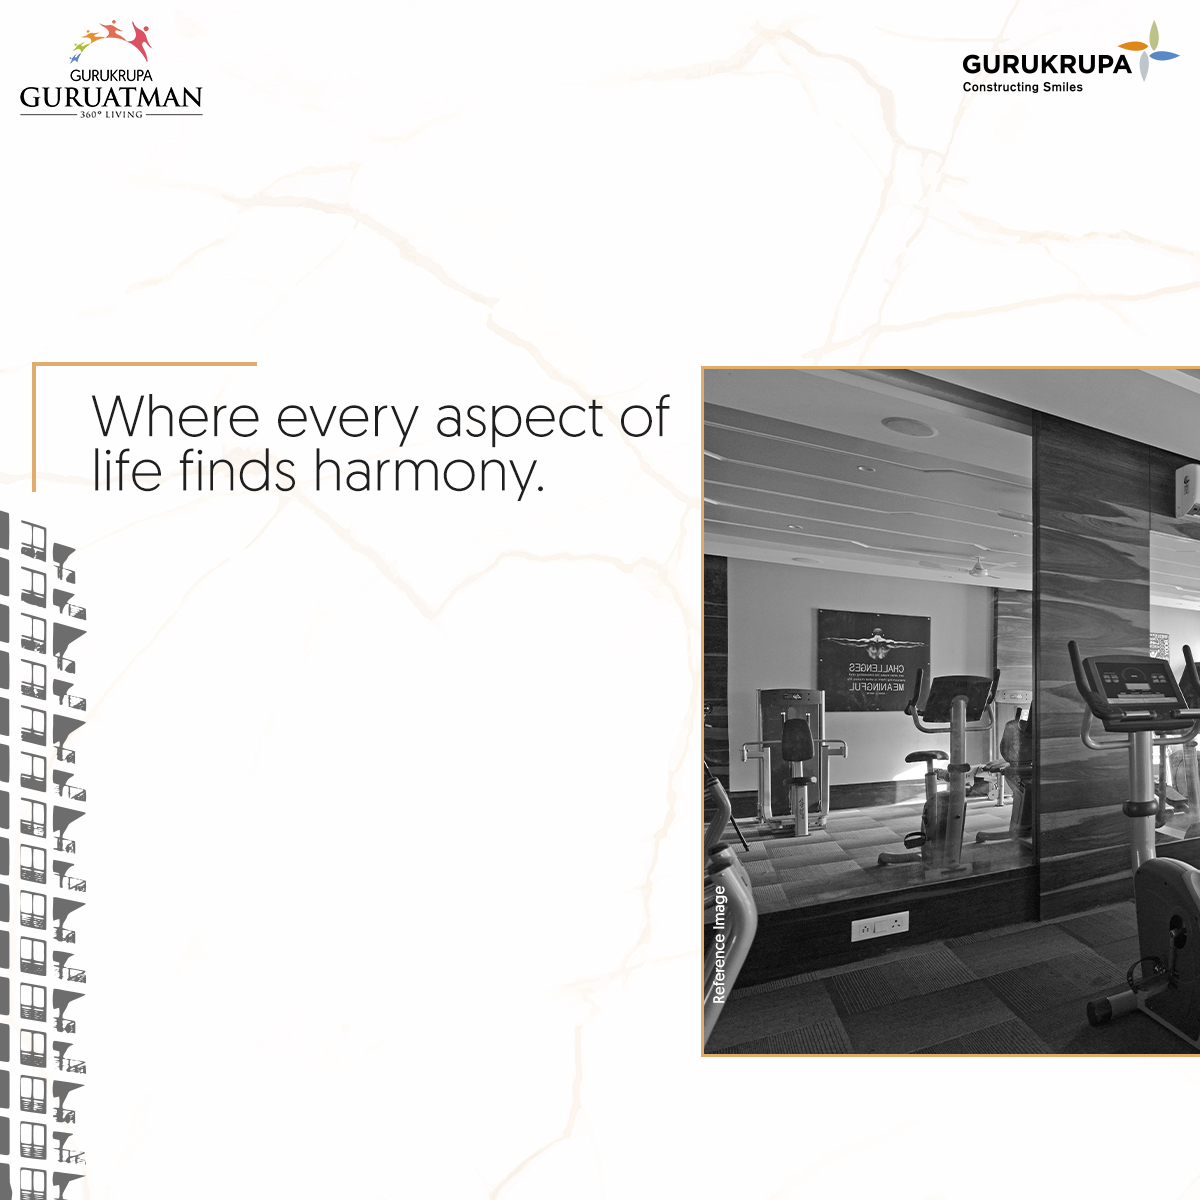 Experience the essence of true living at GuruAtman Residences, where every day unfolds with peace, joy, and a deep sense of connection.

#GurukrupaGroup #GuruAtman #Connectivity #ResonatesWithAspirations #IdealLivingSpace #SeamlessPath #DreamHome #Aspirations #SmoothConnectivity